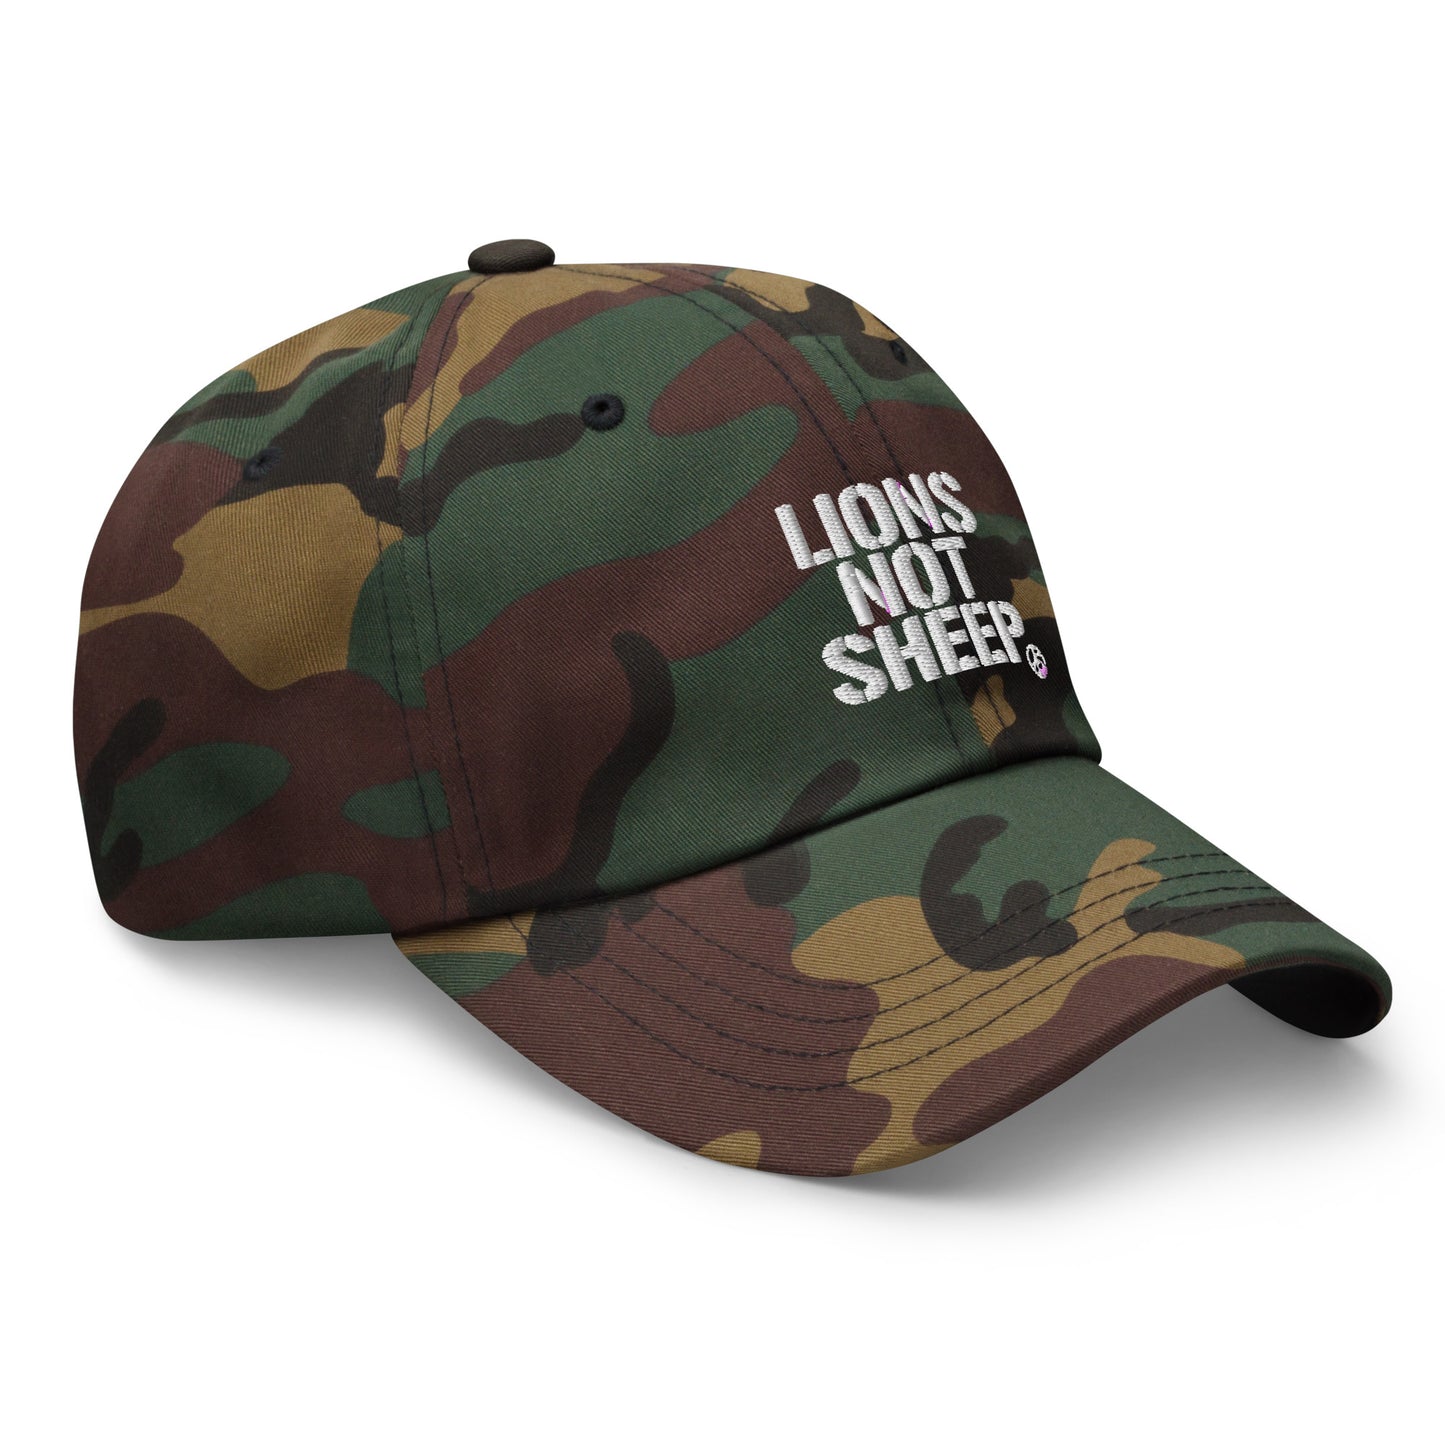 Lions Not Sheep Hat